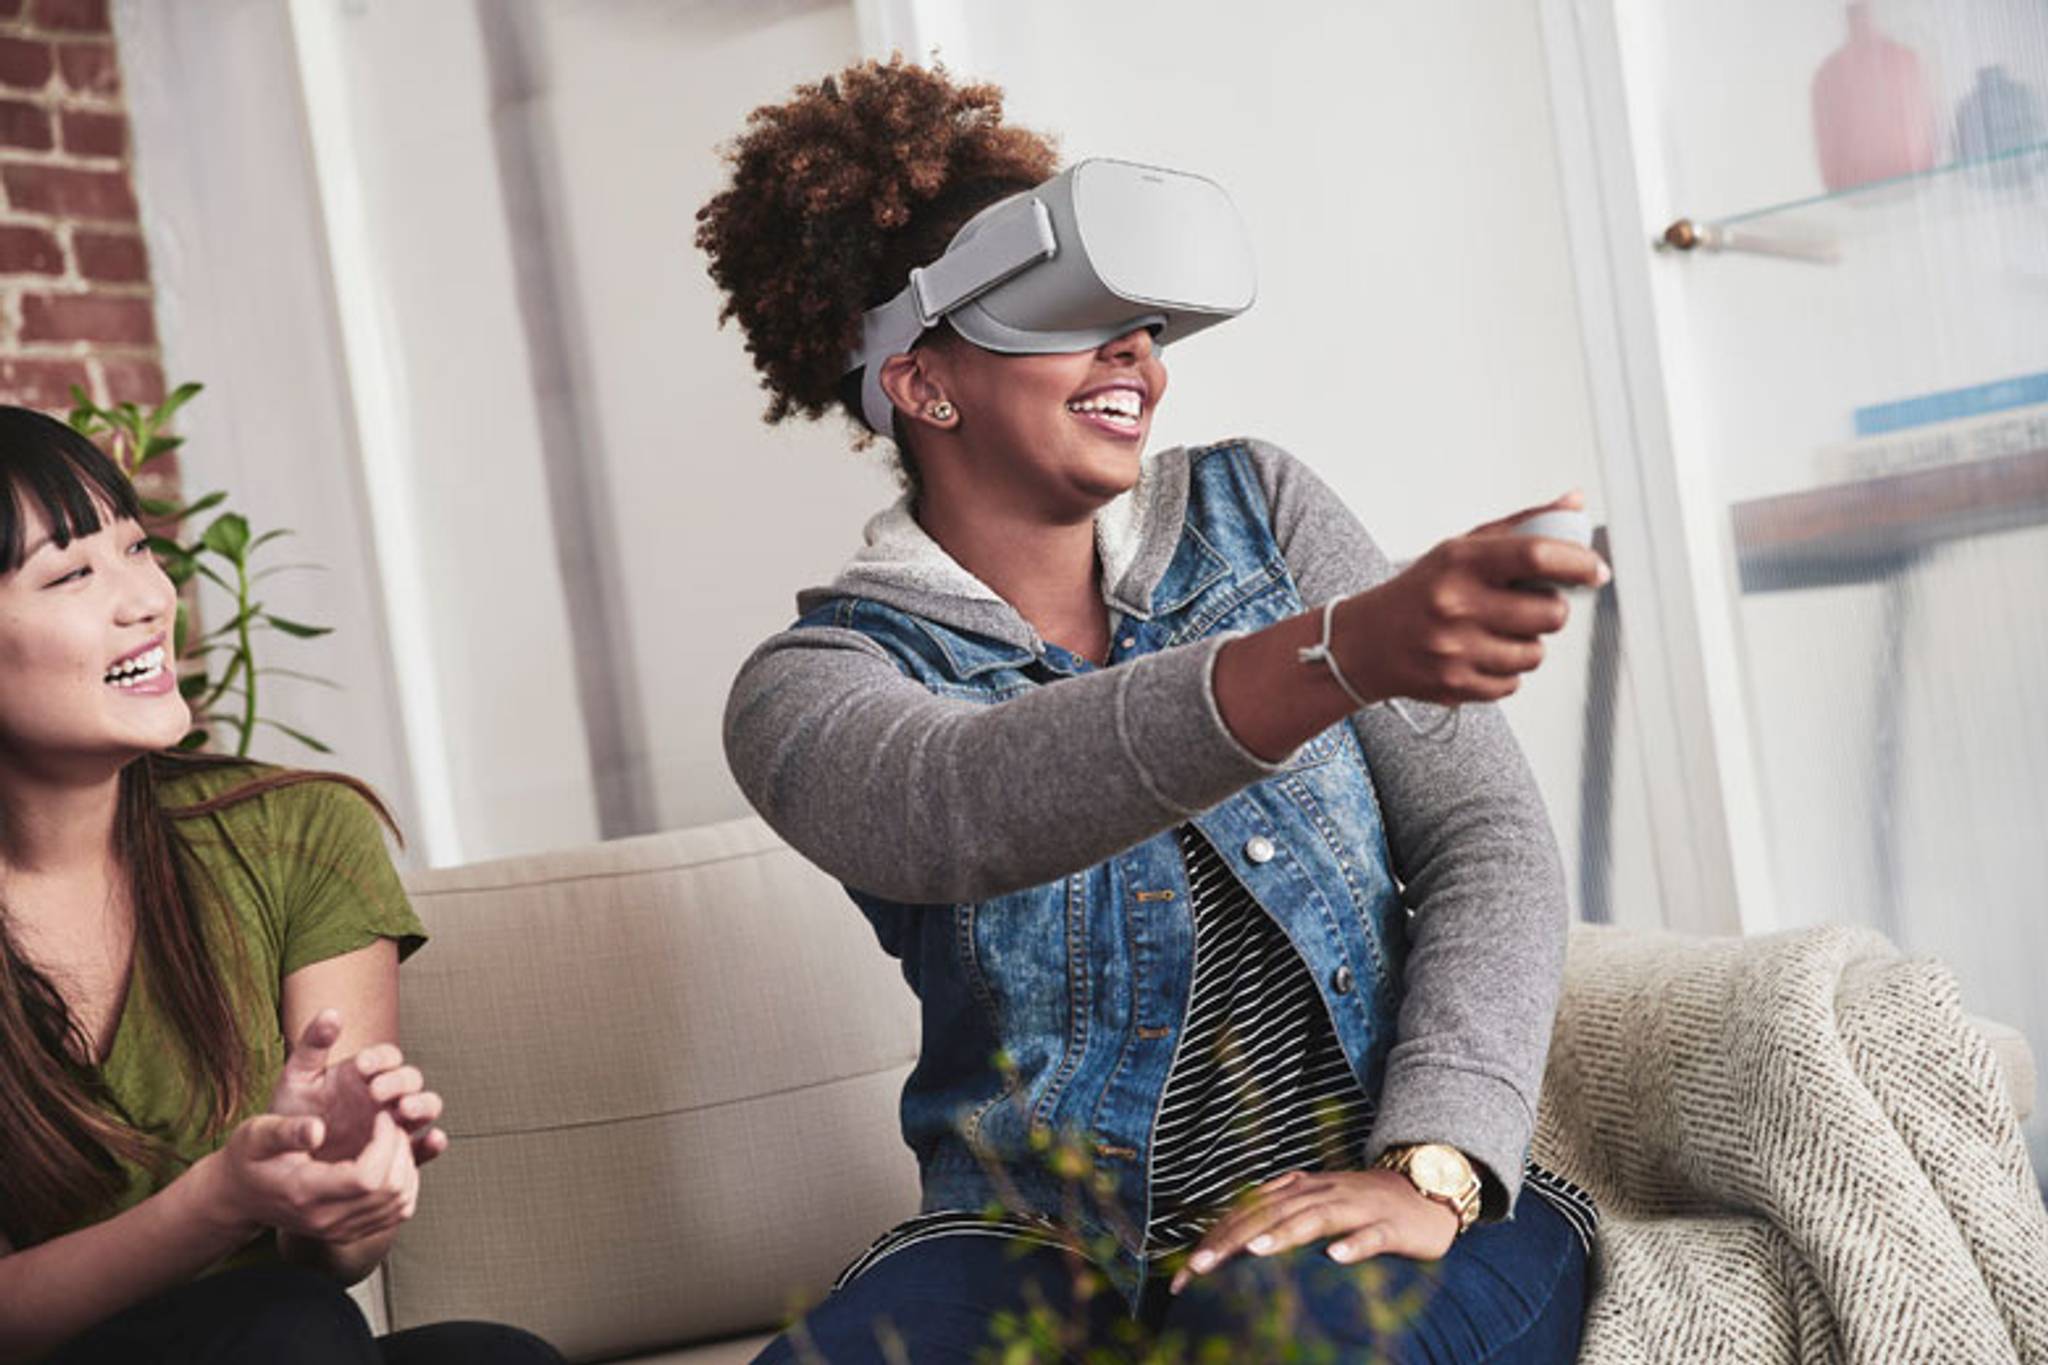 Oculus Go brings VR to the masses